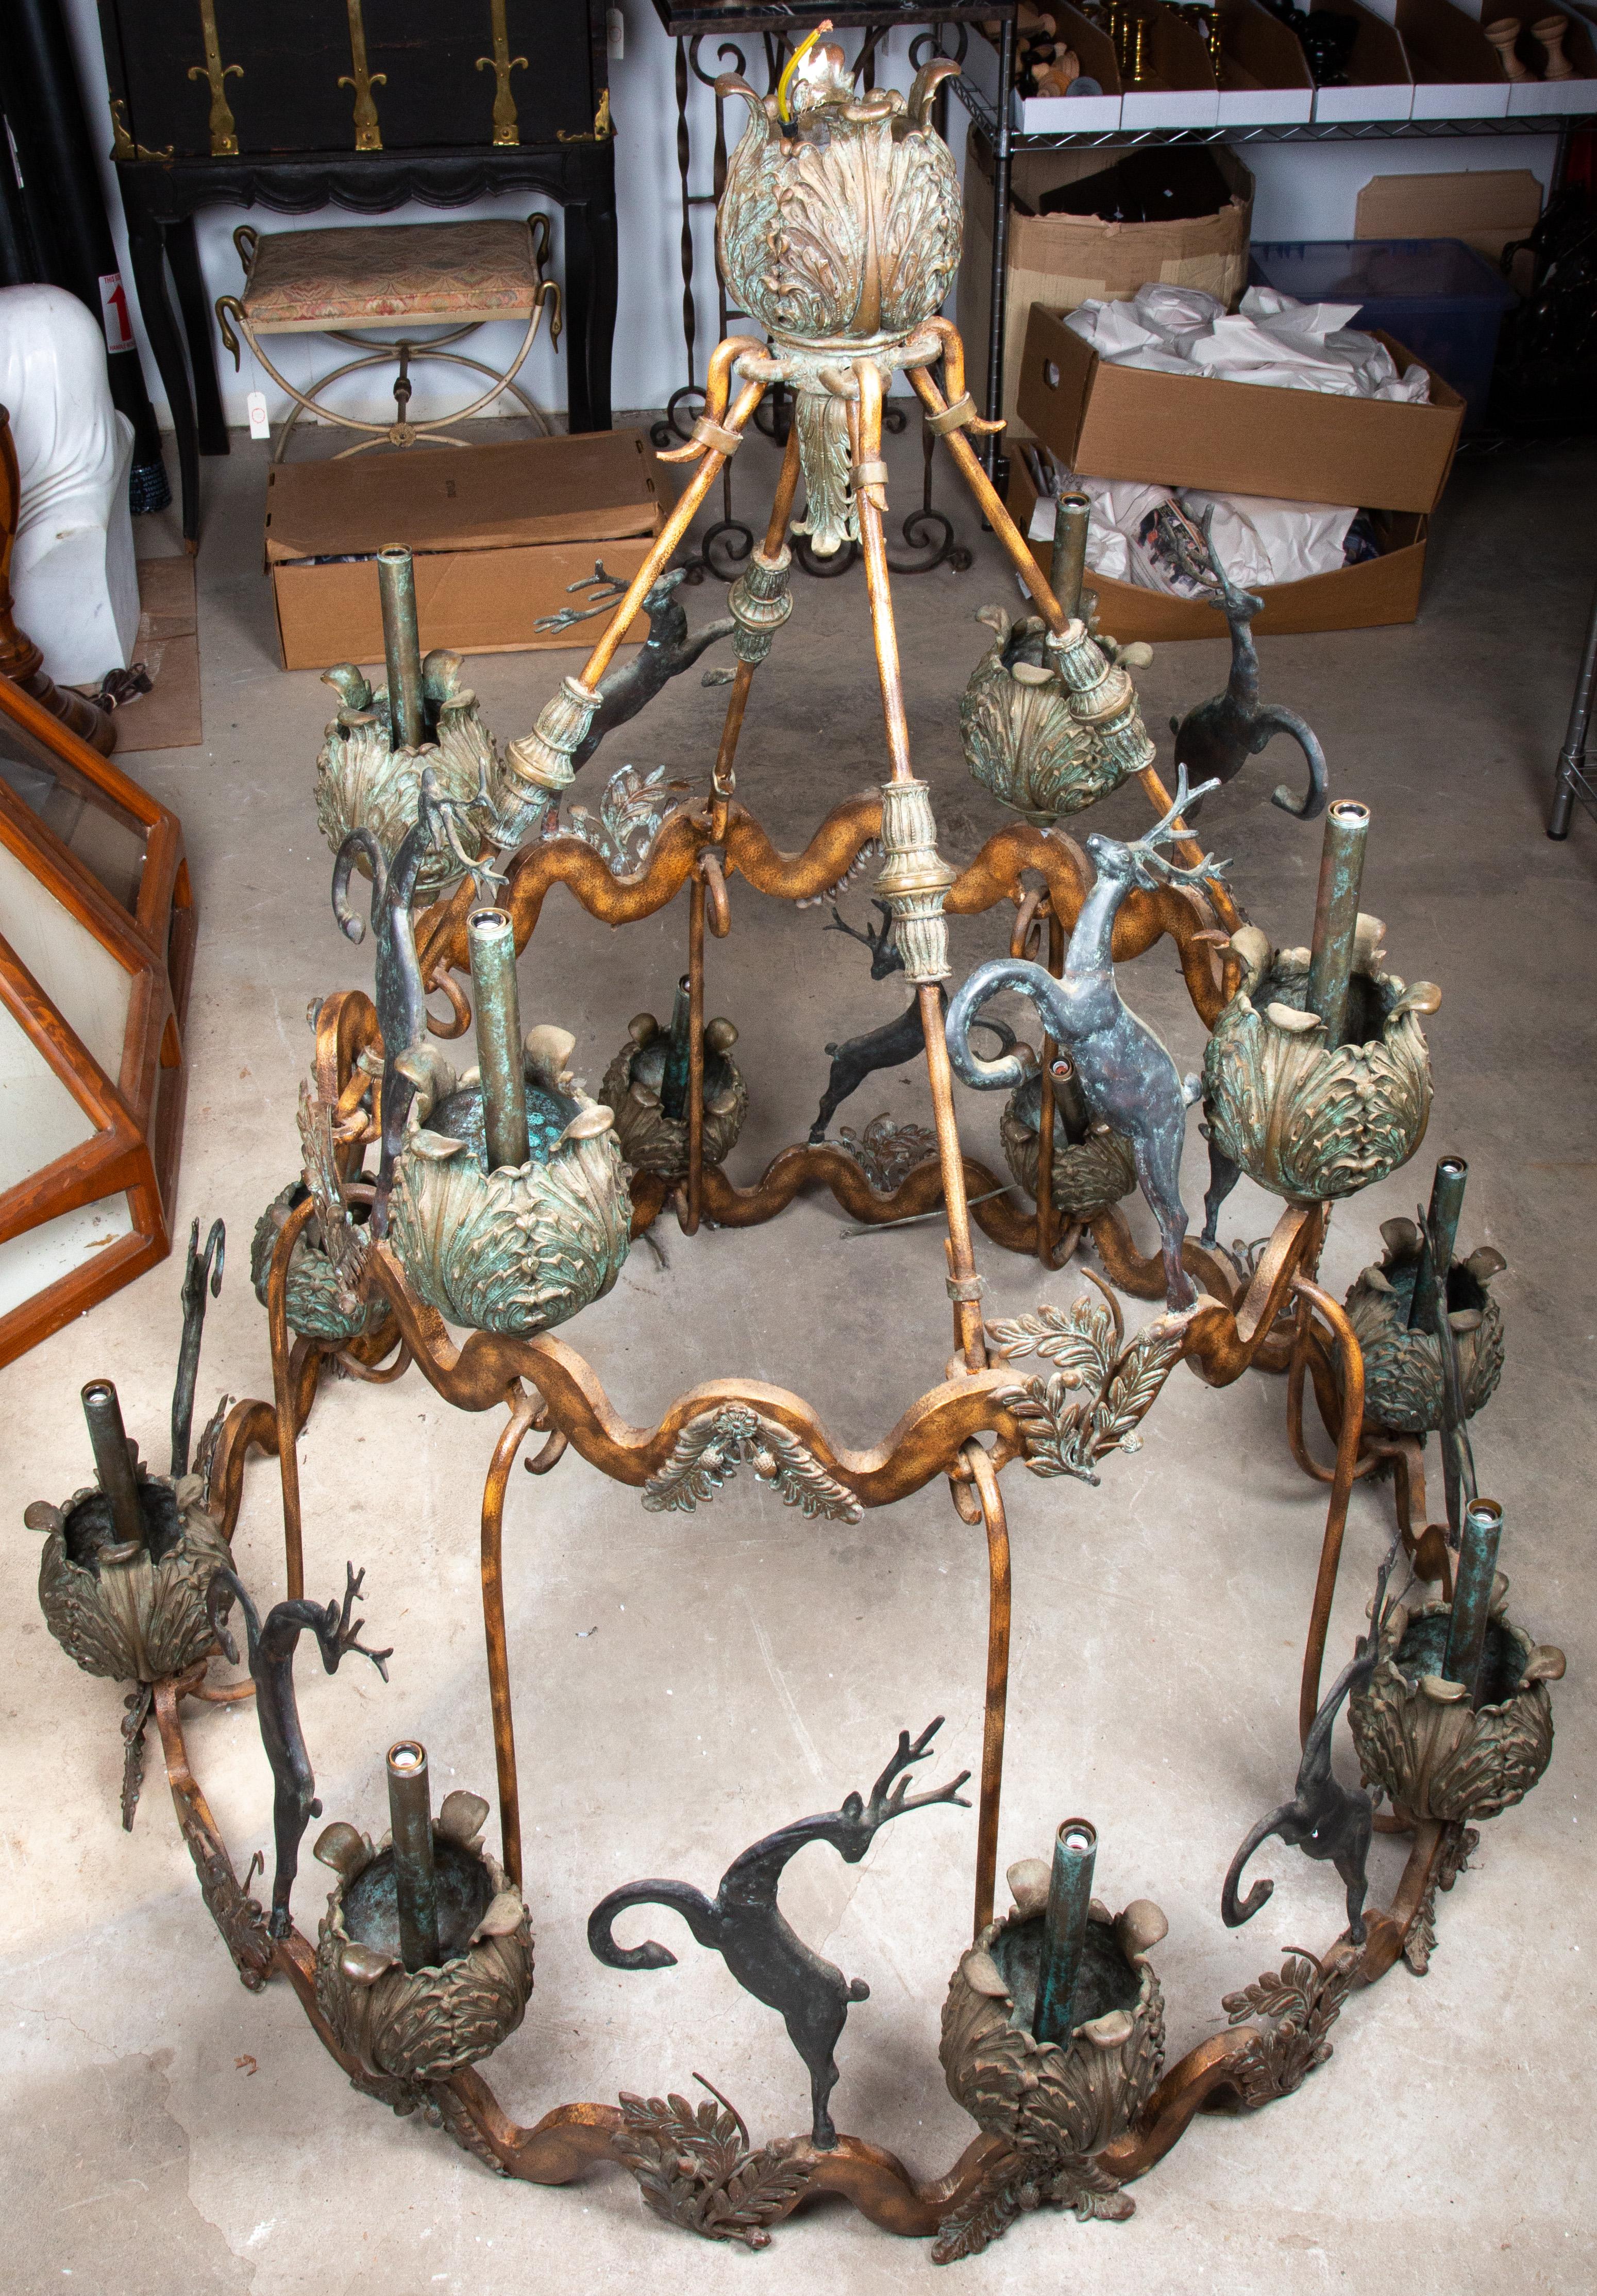 A monumental early 20th century continental iron and bronze chandelier with leaping stags in silhouette and different fauna.